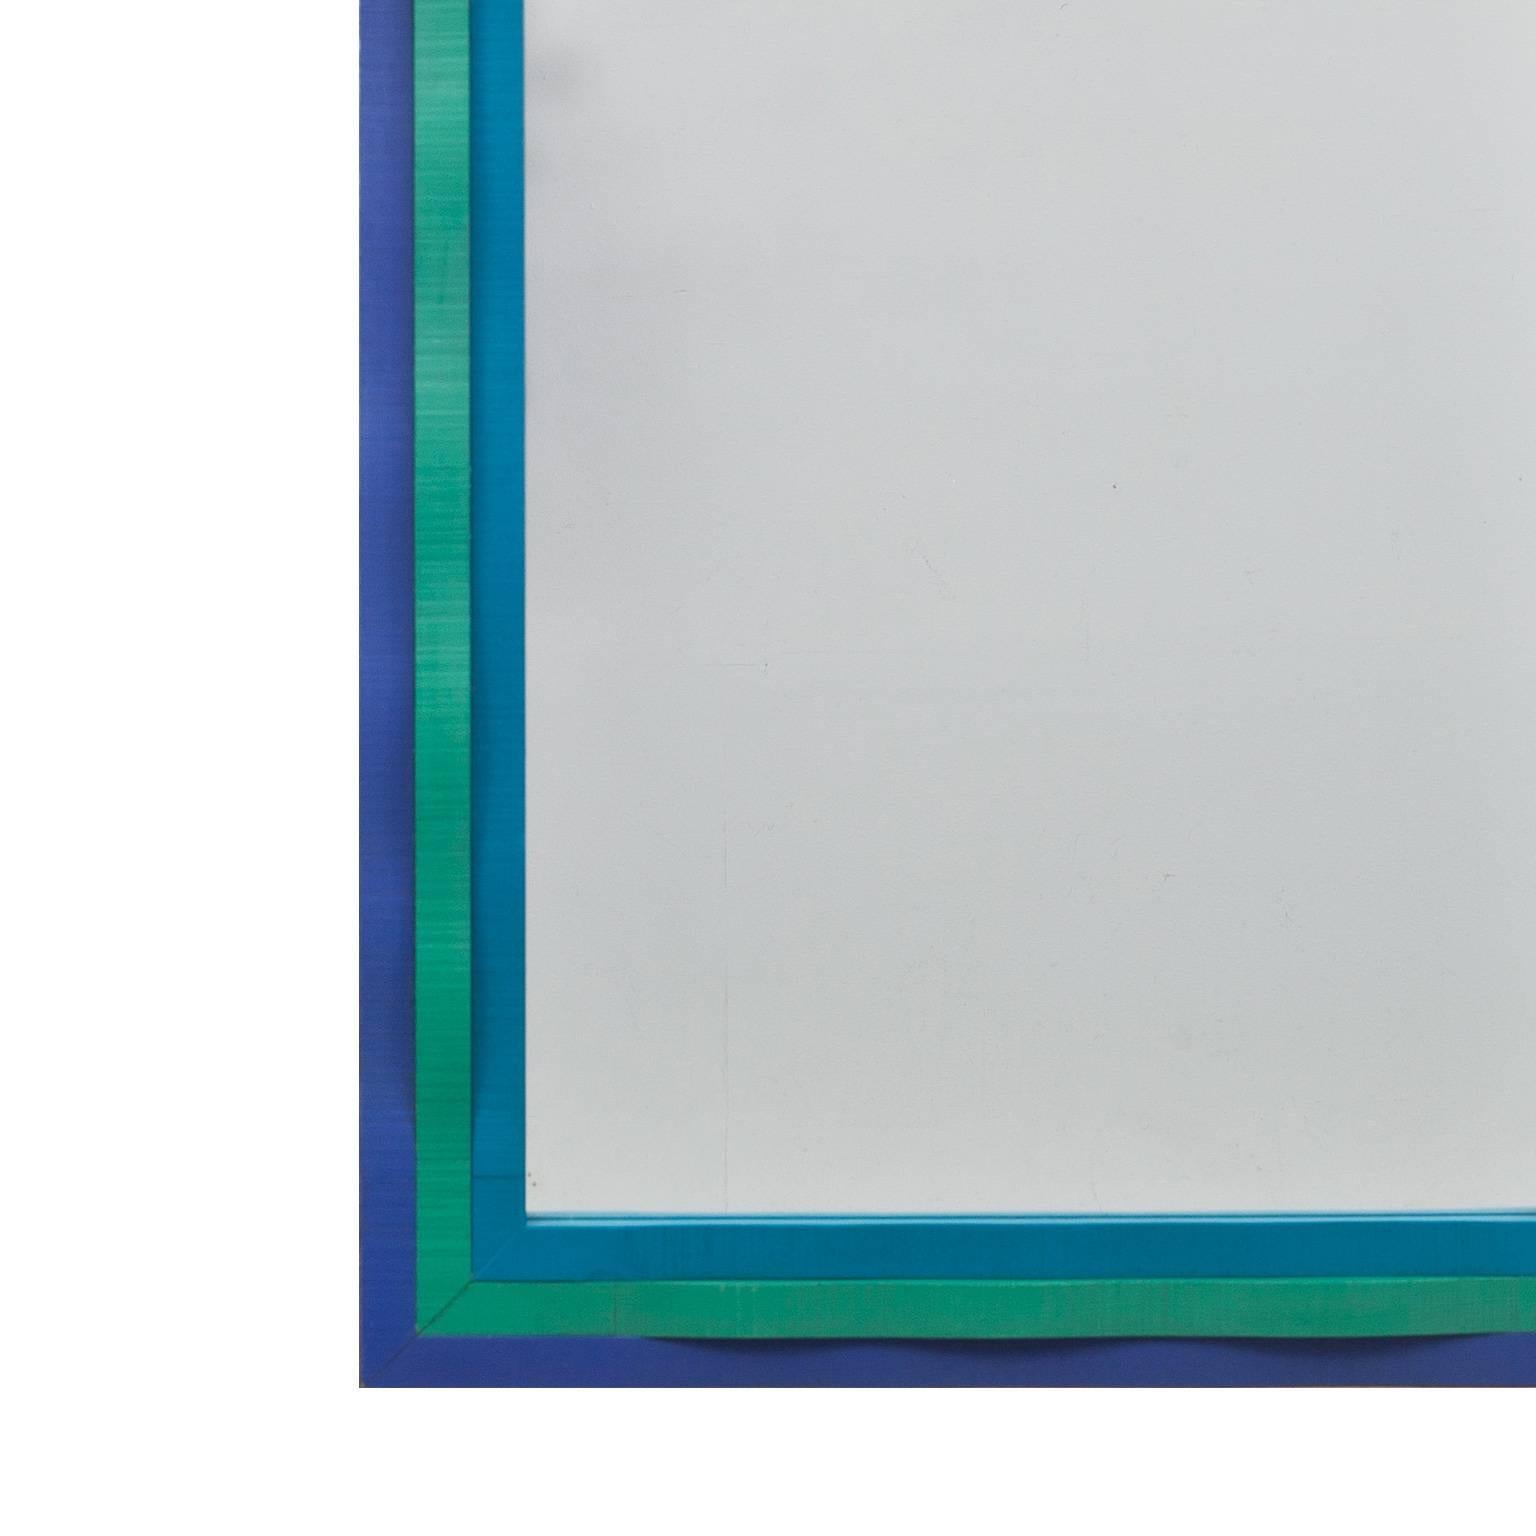 This mirror was manufactured i Eriksmåla in Sweden by the odd Swedish designer Erik Höglund who's often worked with artisanal forms. This frame are carved and has a wave pattern in relief. Painted in blue, green and turquoise shades. The mirror is